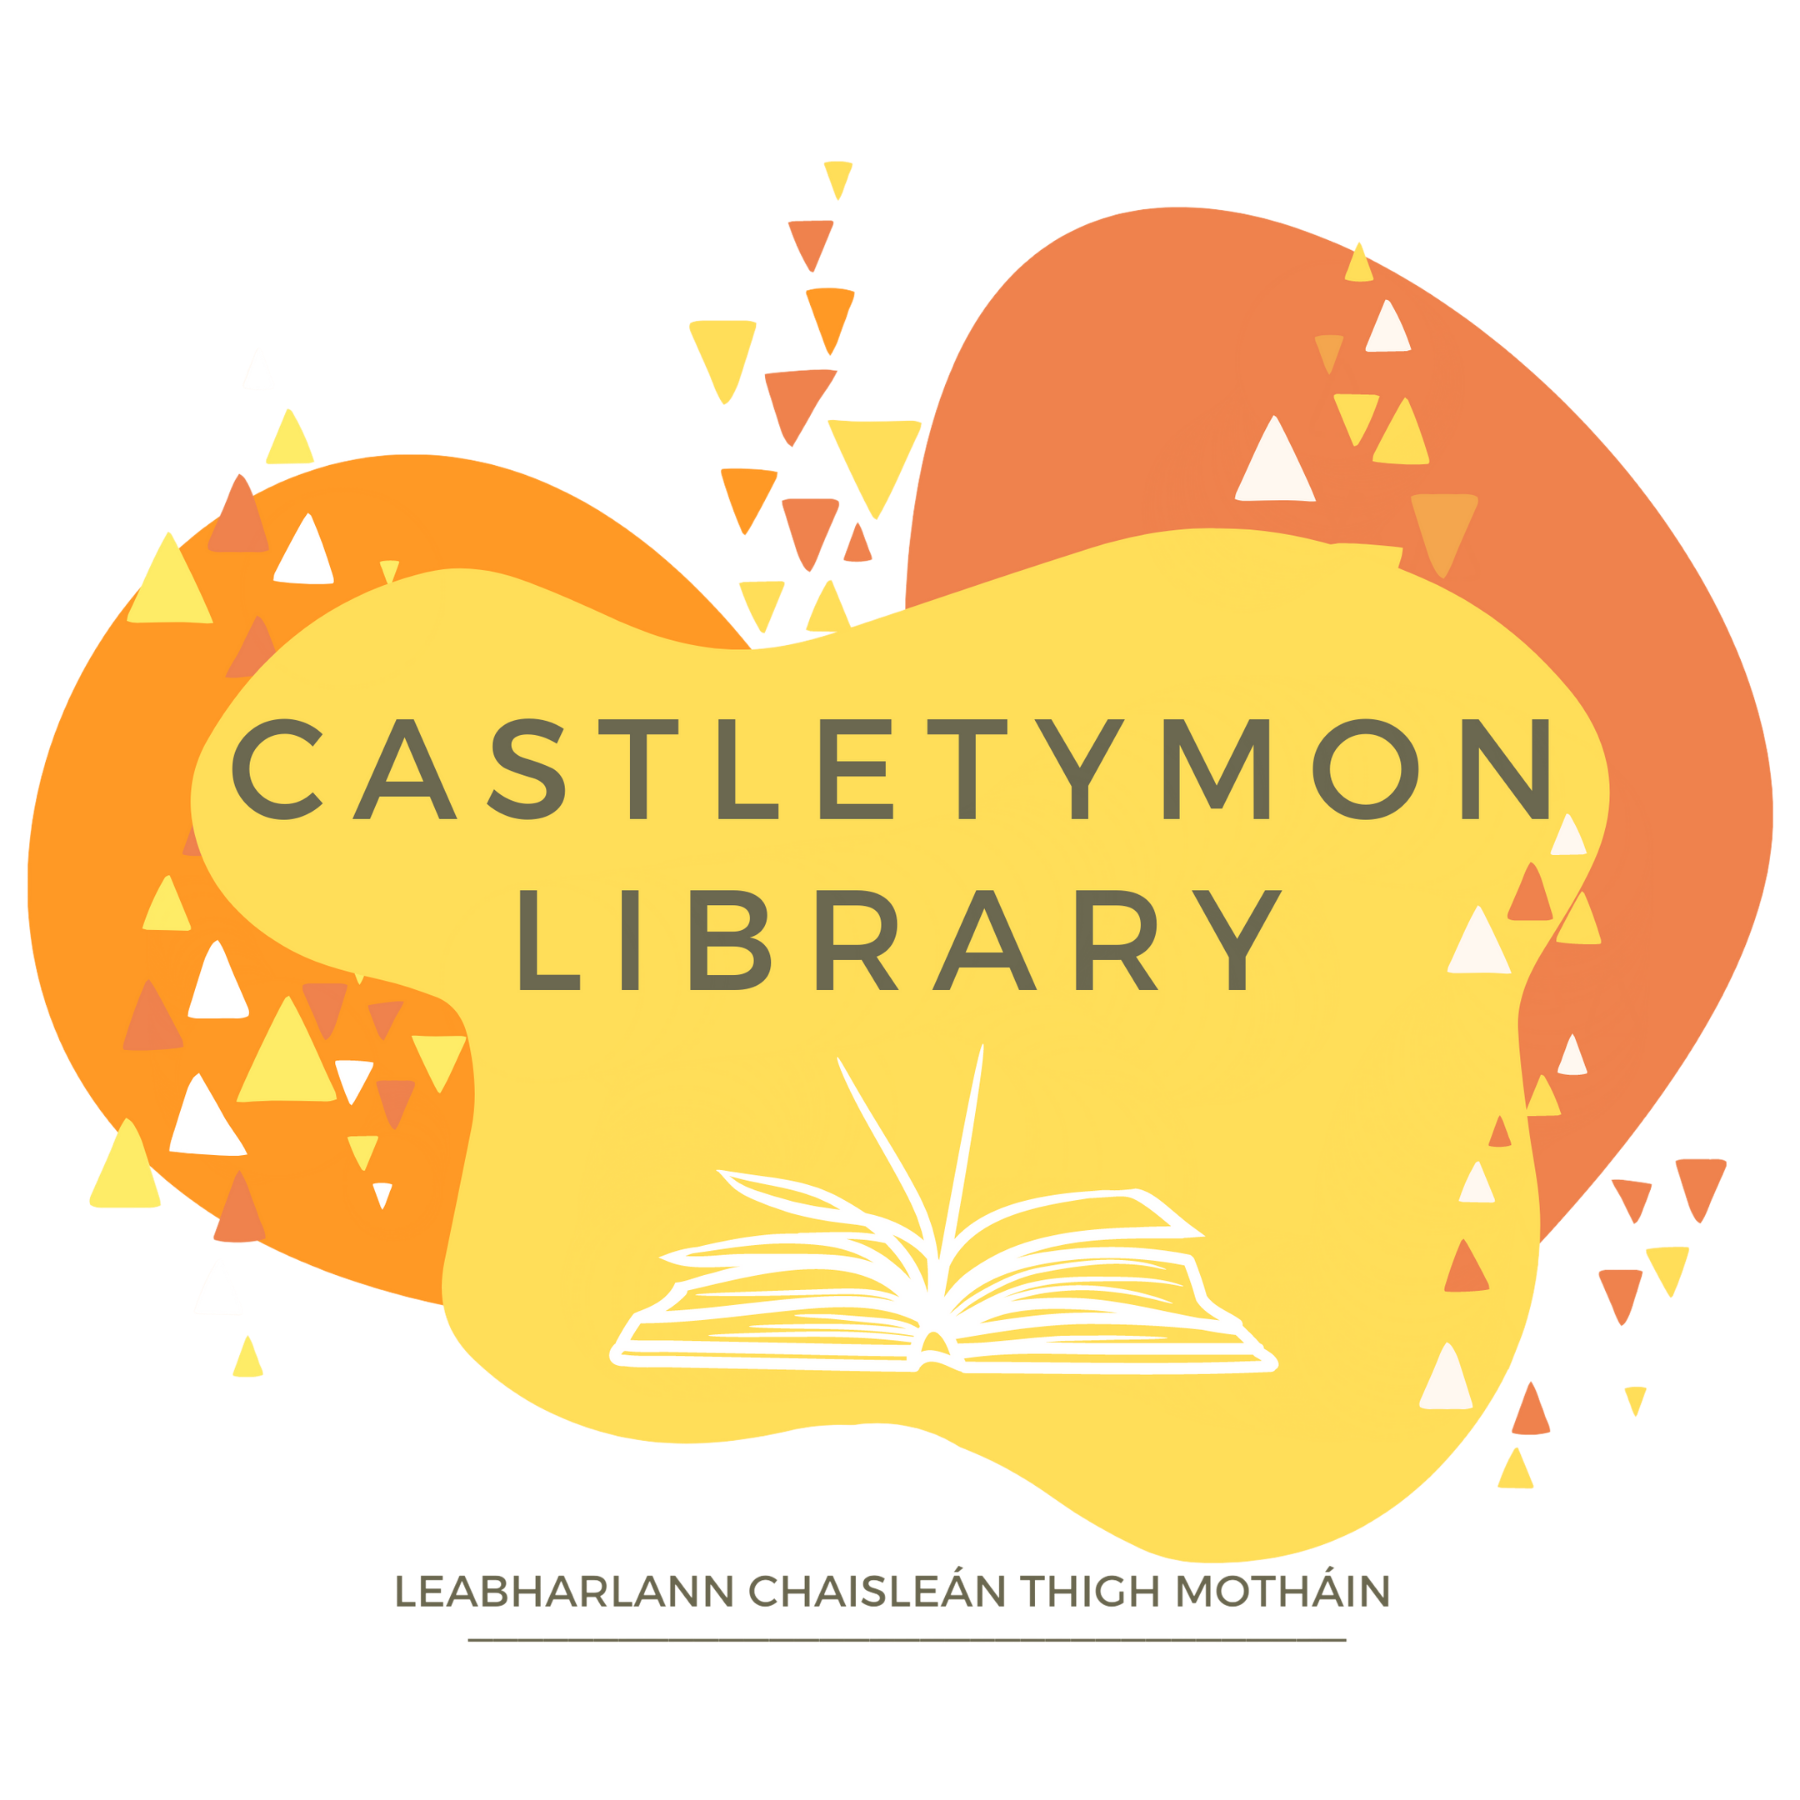 Castletymon Library Events September 2023 sumamry image